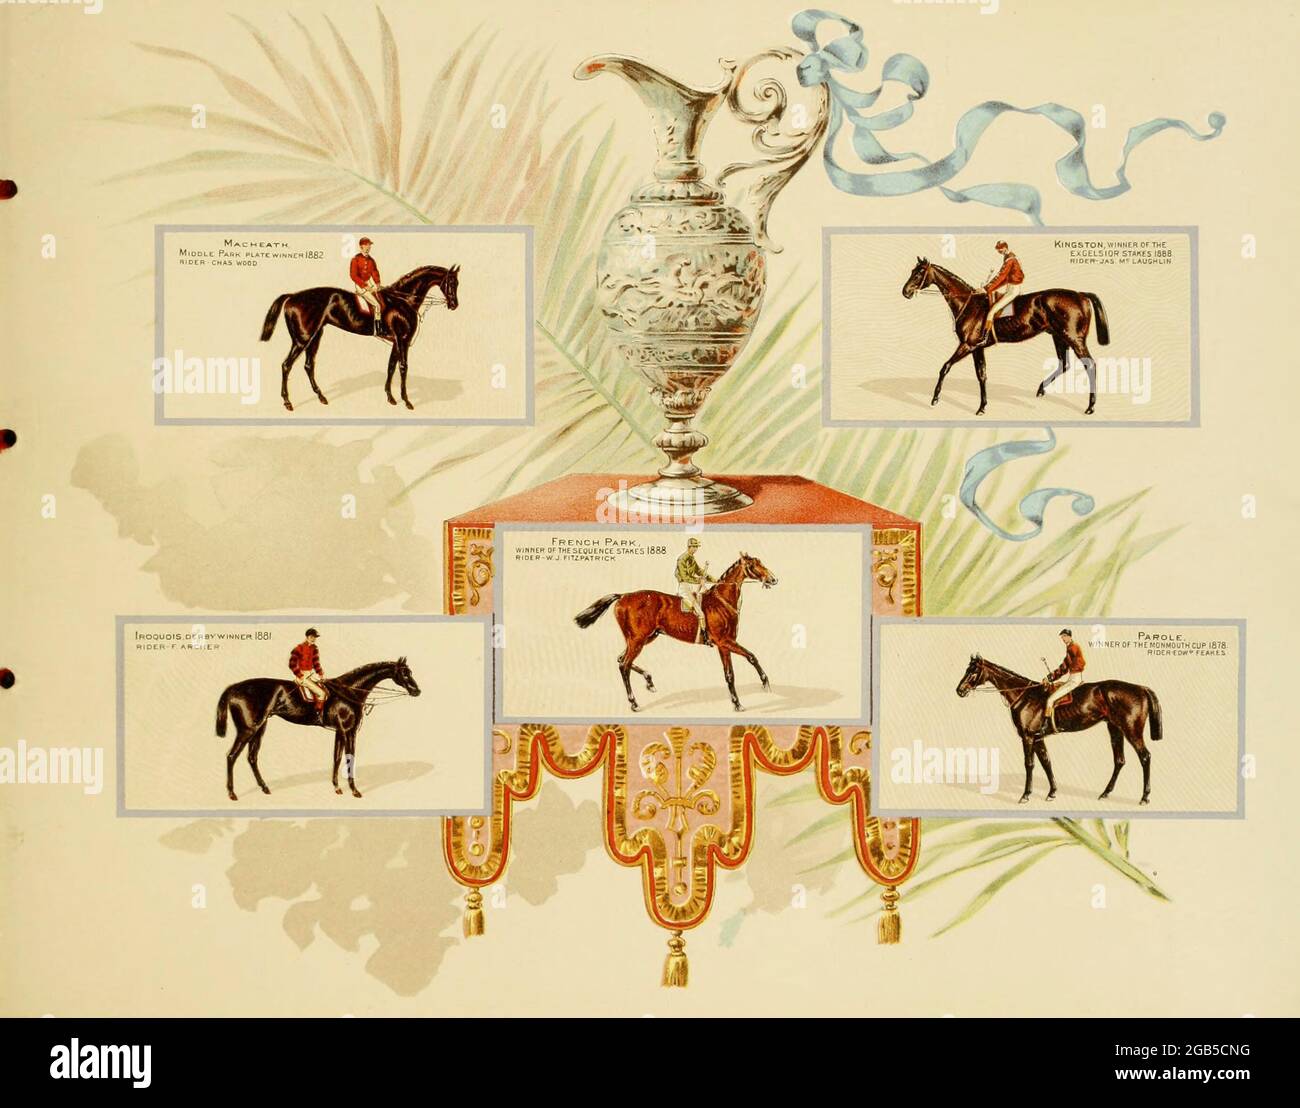 Horse racing trading cards from the ' Album of celebrated American and English running horses ' by Kinney Bros Published in New Your in 1888 By Kinney Brothers to advance the sales of their cigarette brands. The Kinney Tobacco Company was an American cigarette manufacturing firm that created the Sweet Caporal cigarette brand and promoted it with collectible trading cards. Being a leading cigarette manufacturer of the 1870-1880s, it merged in 1890 into the American Tobacco Company. Stock Photo